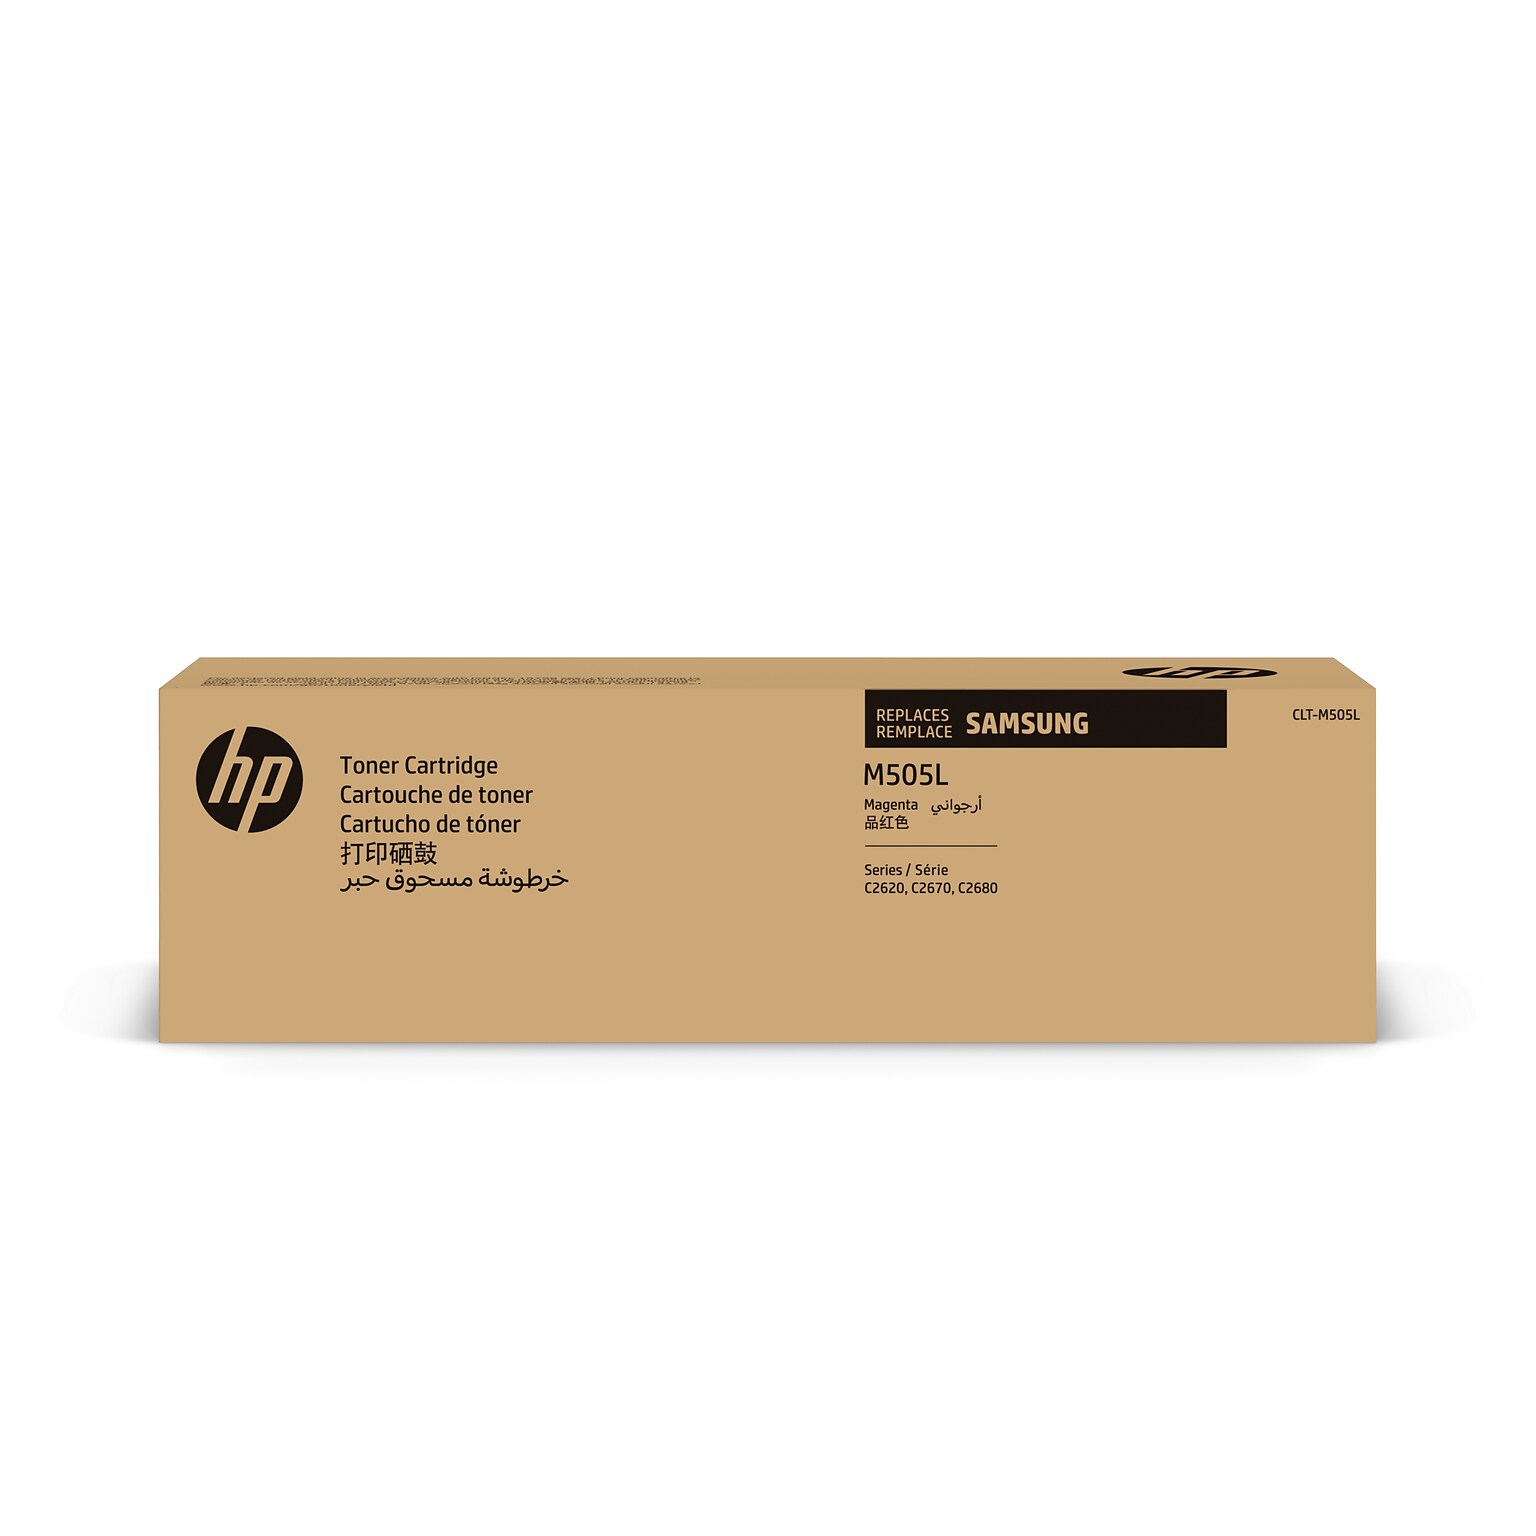 HP M505L Magenta Toner Cartridge for Samsung CLT-M505L (SU302), Samsung-branded printer supplies are now HP-branded